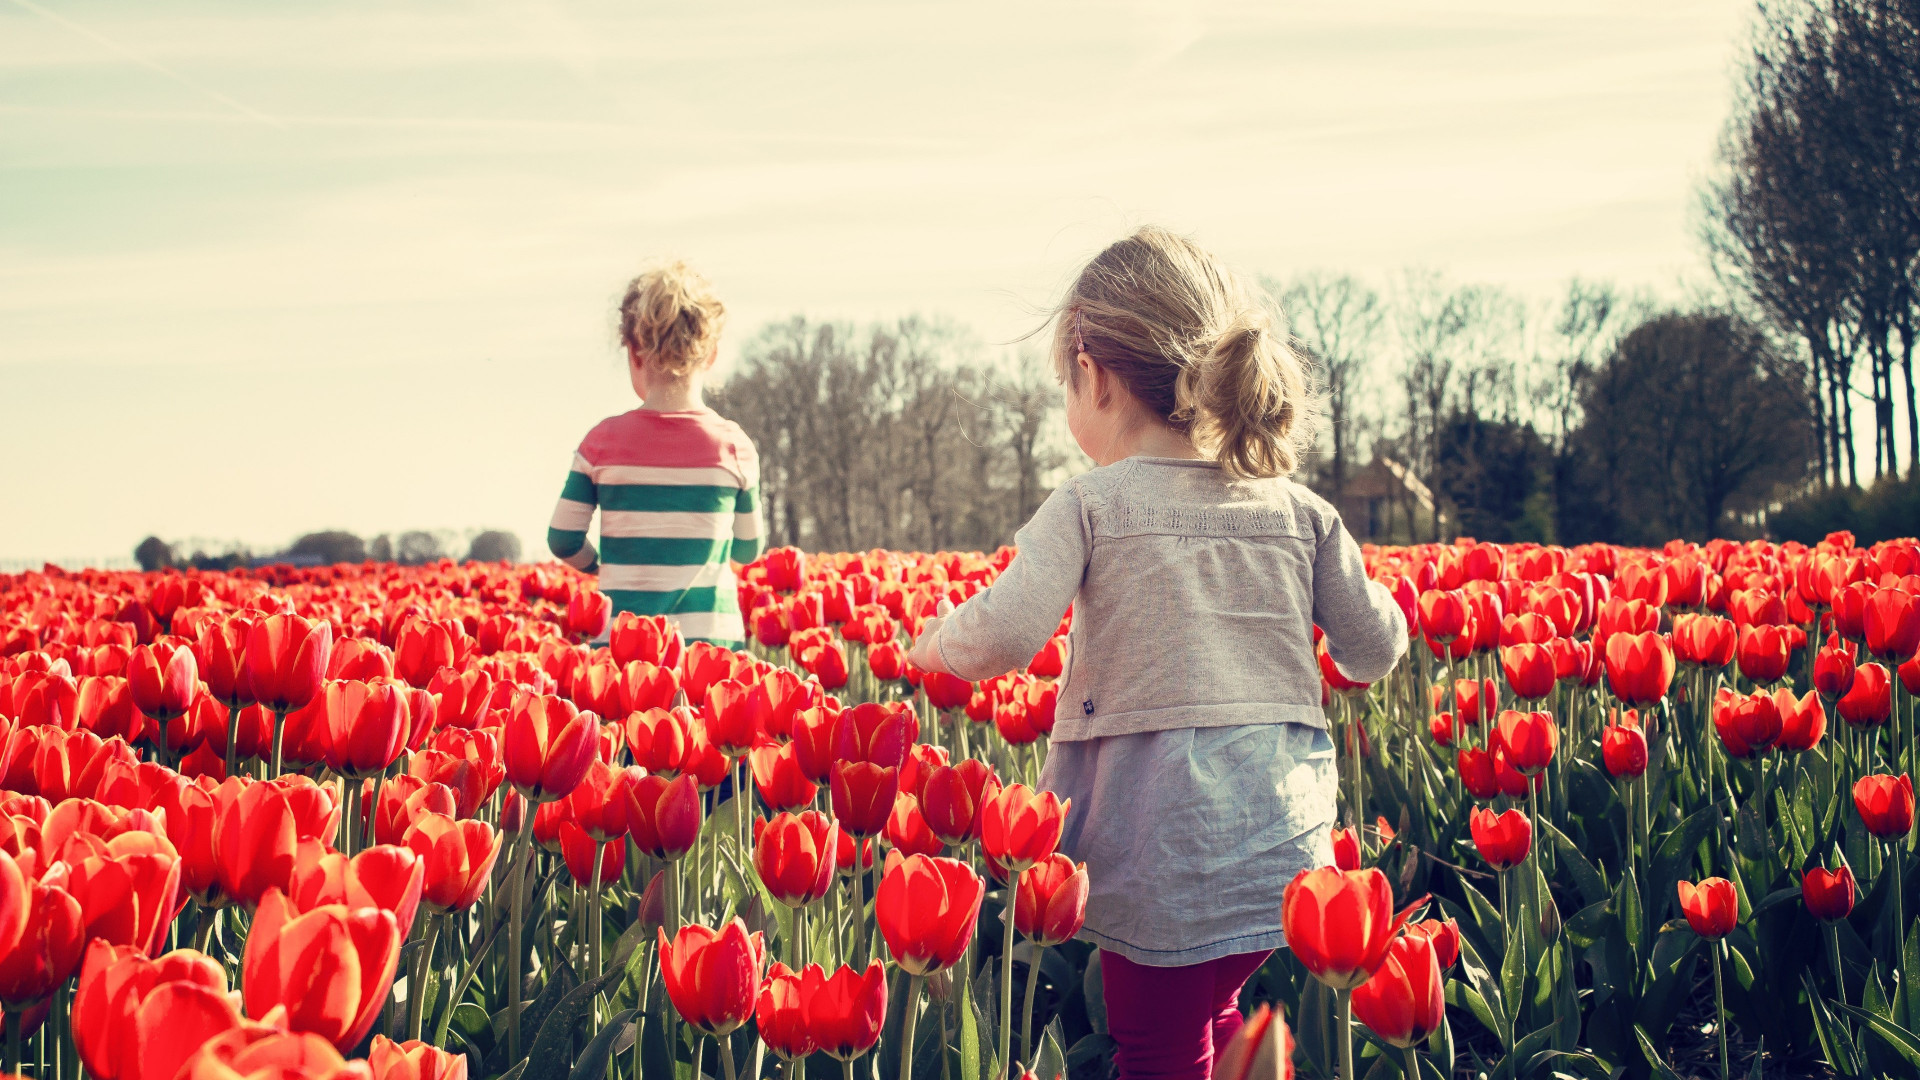 Children in the land with tulips wallpaper 1920x1080